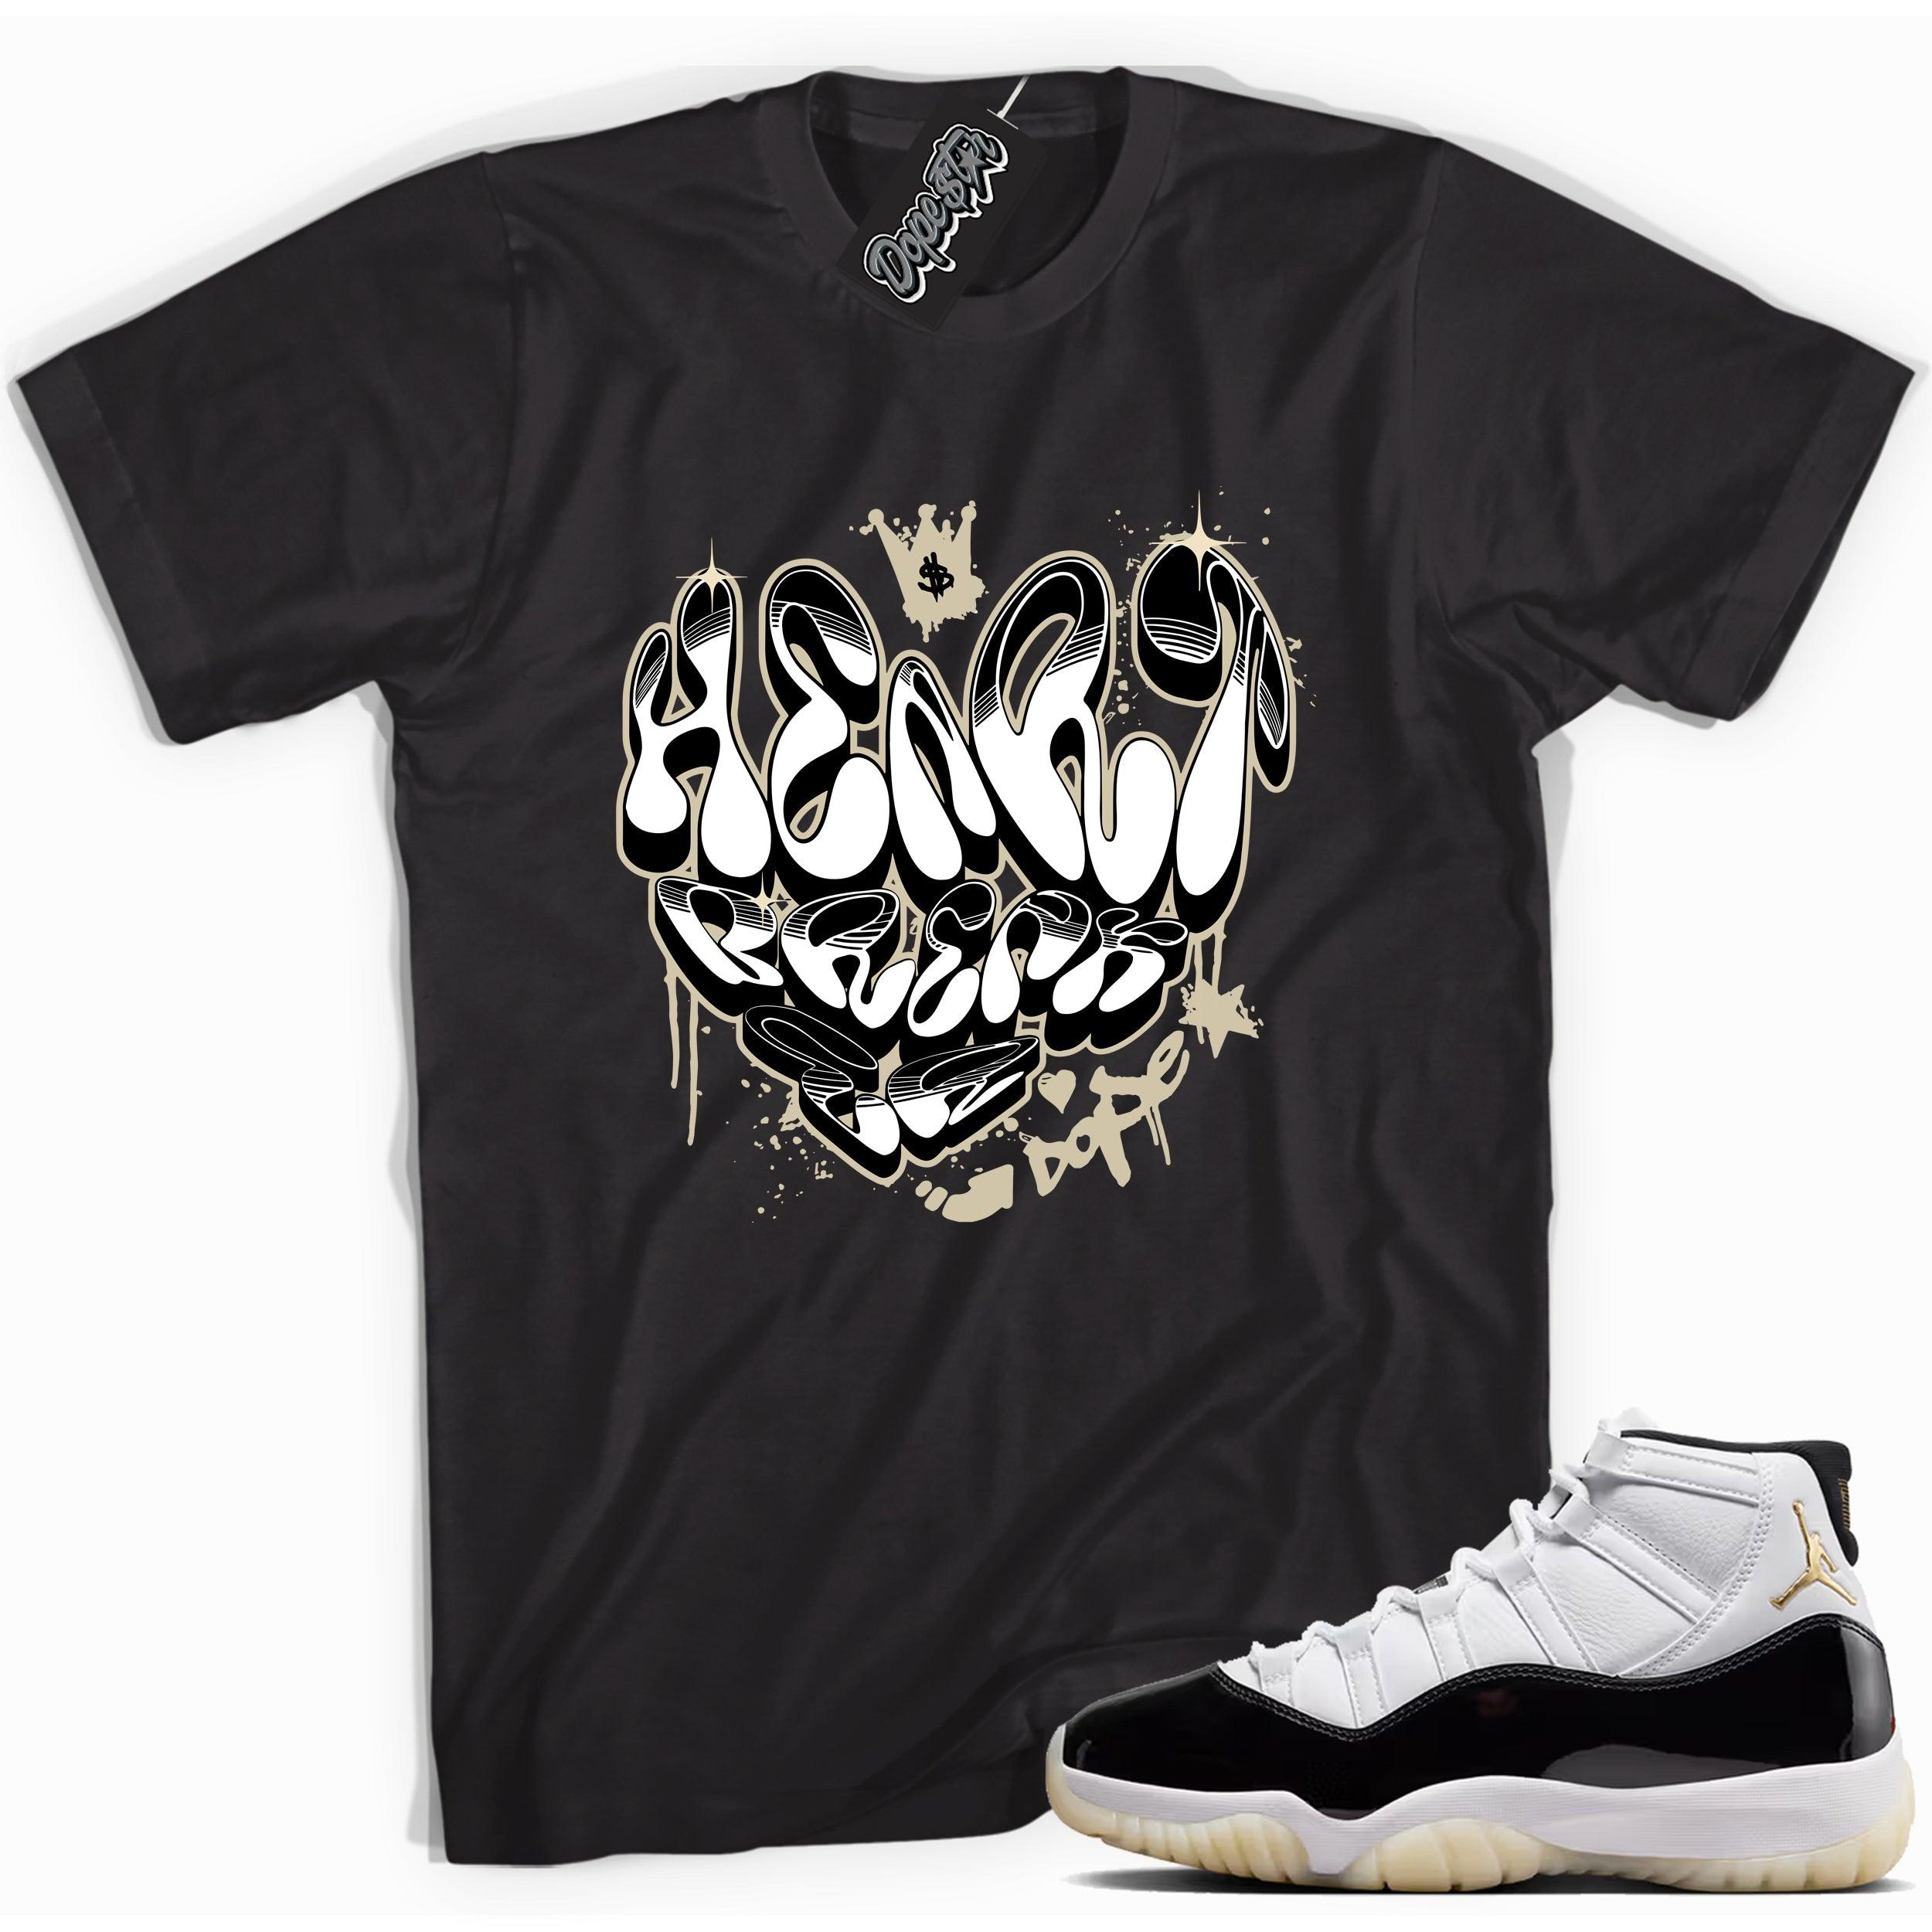 Cool Black graphic tee with “ Heartbreaker Graffiti ” print, that perfectly matches AIR JORDAN 11 GRATITUDE  sneakers 